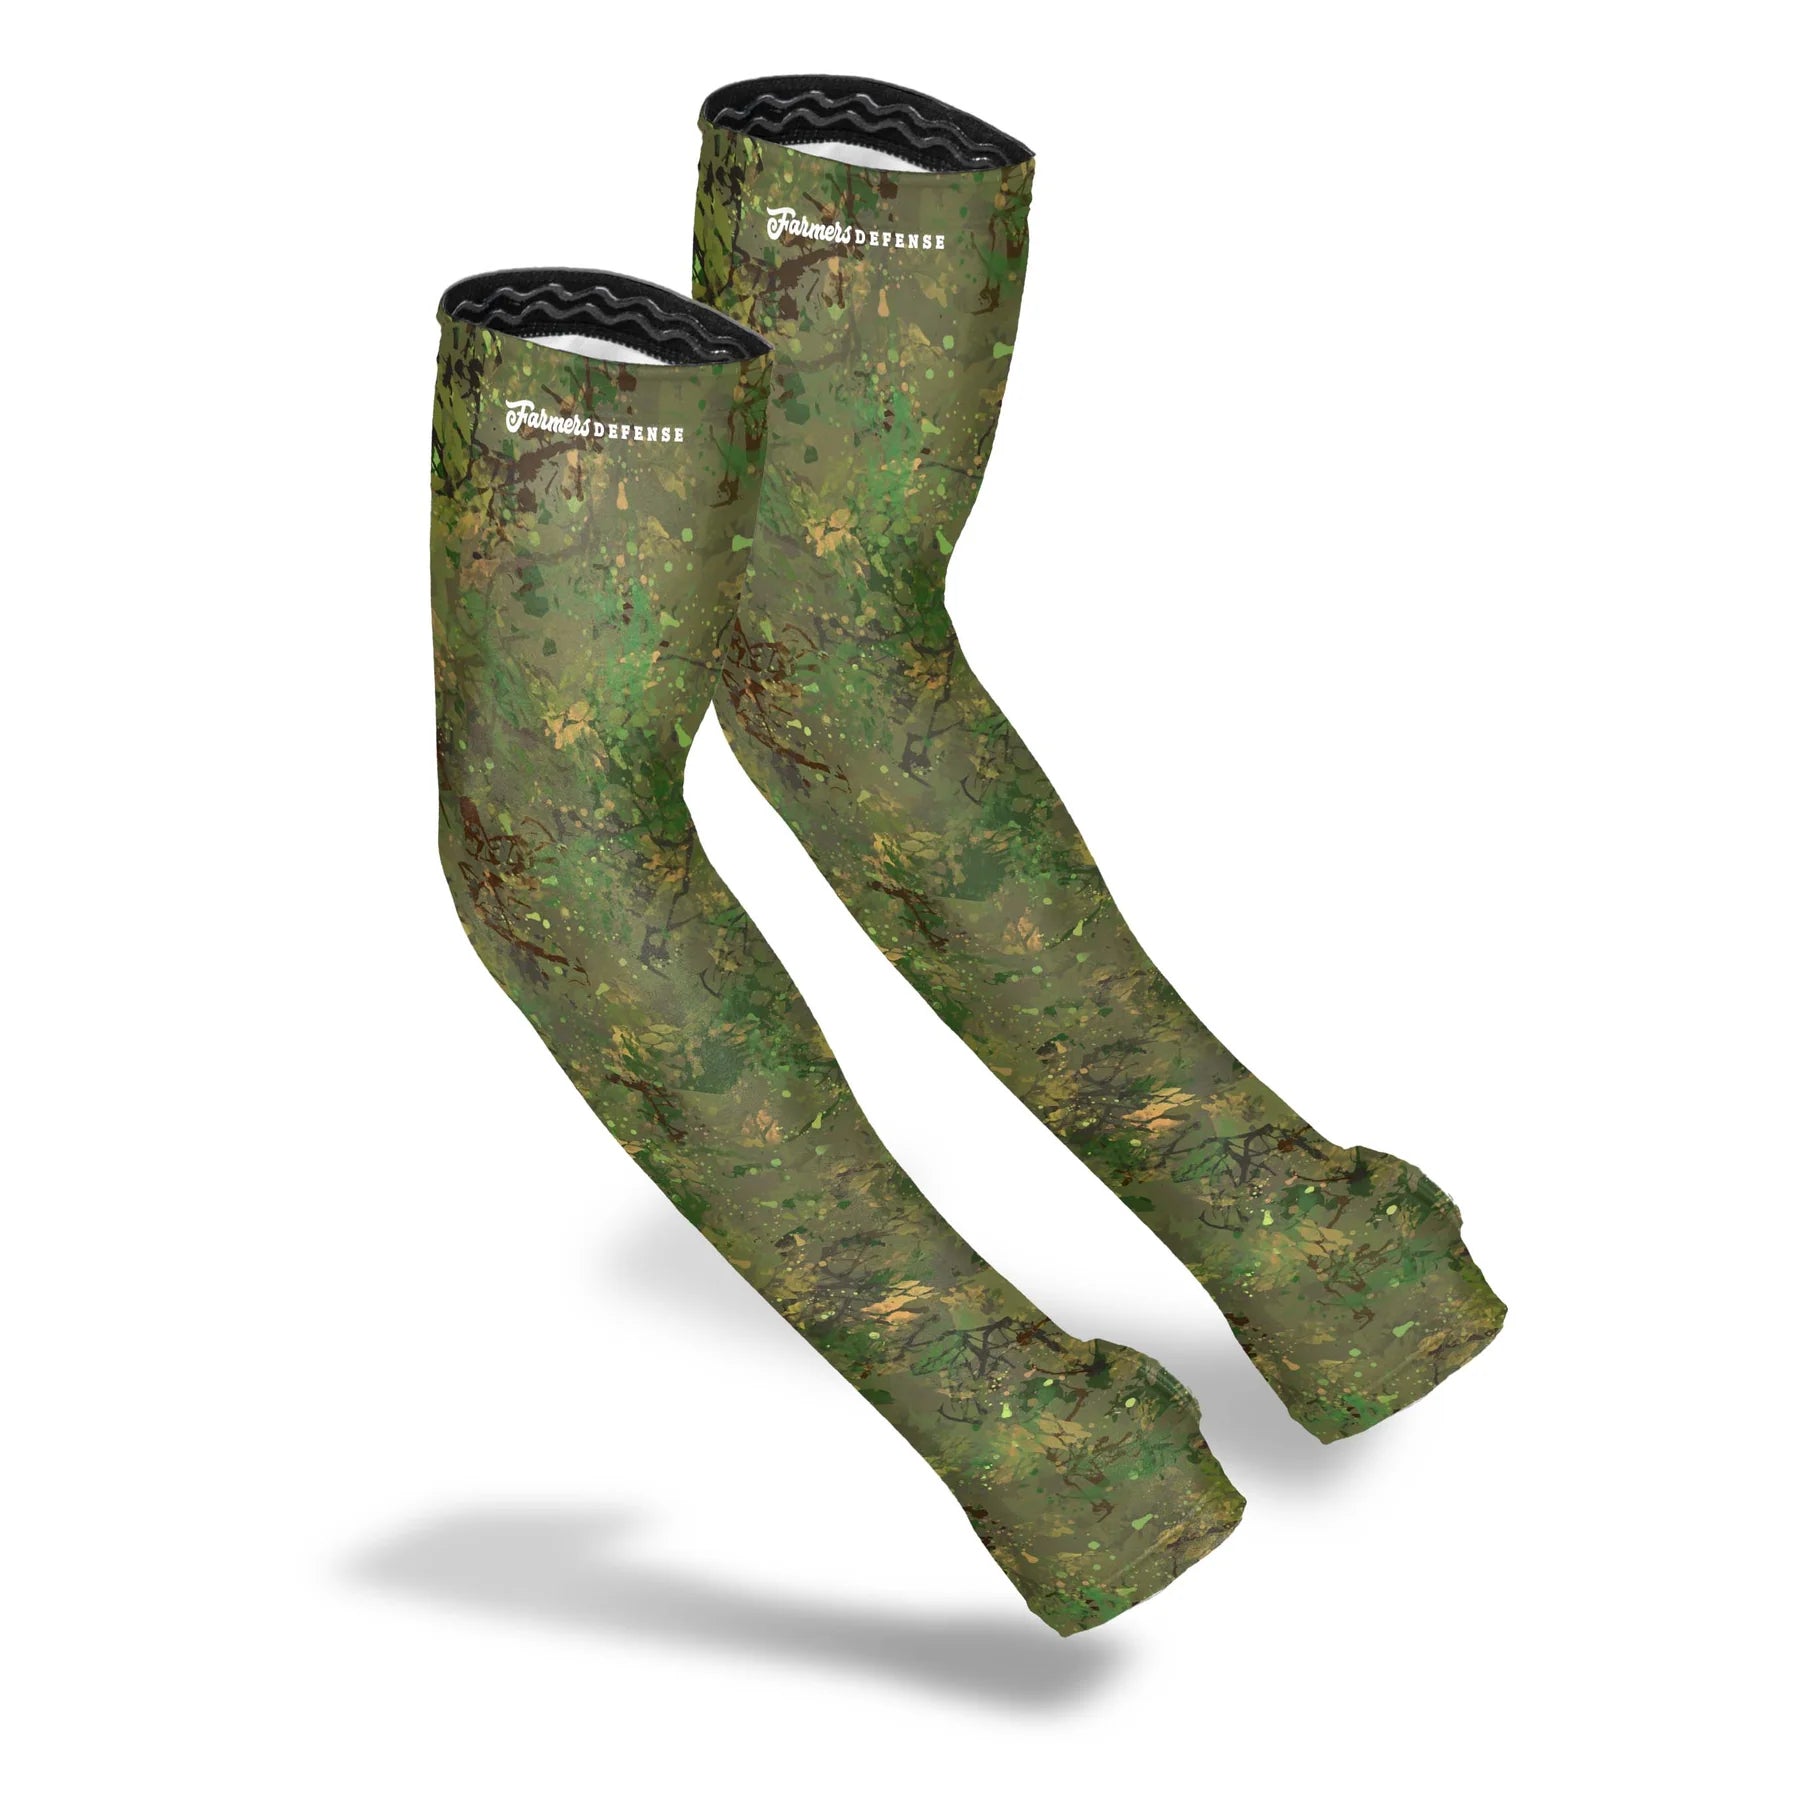 Camouflage print protective gardening sleeves for arms